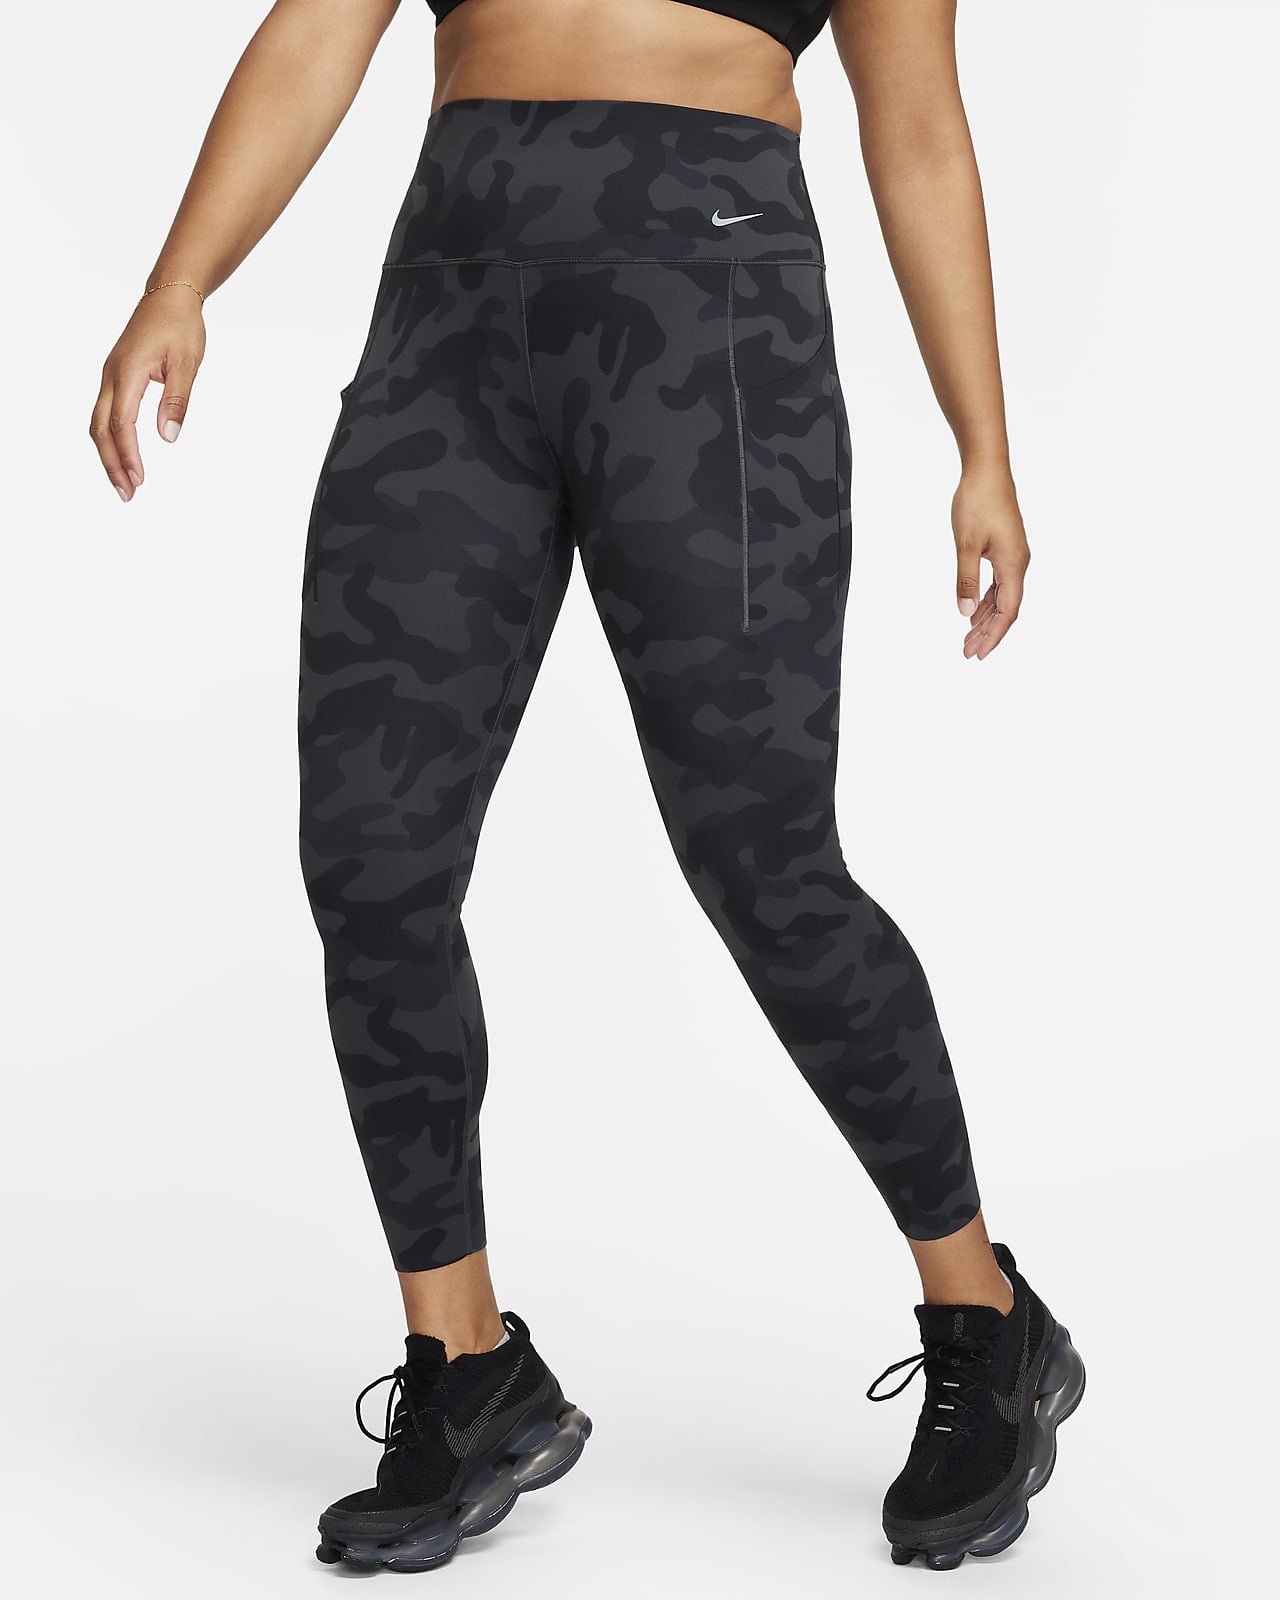 Pack of 2 Leggings with Insert Pockets